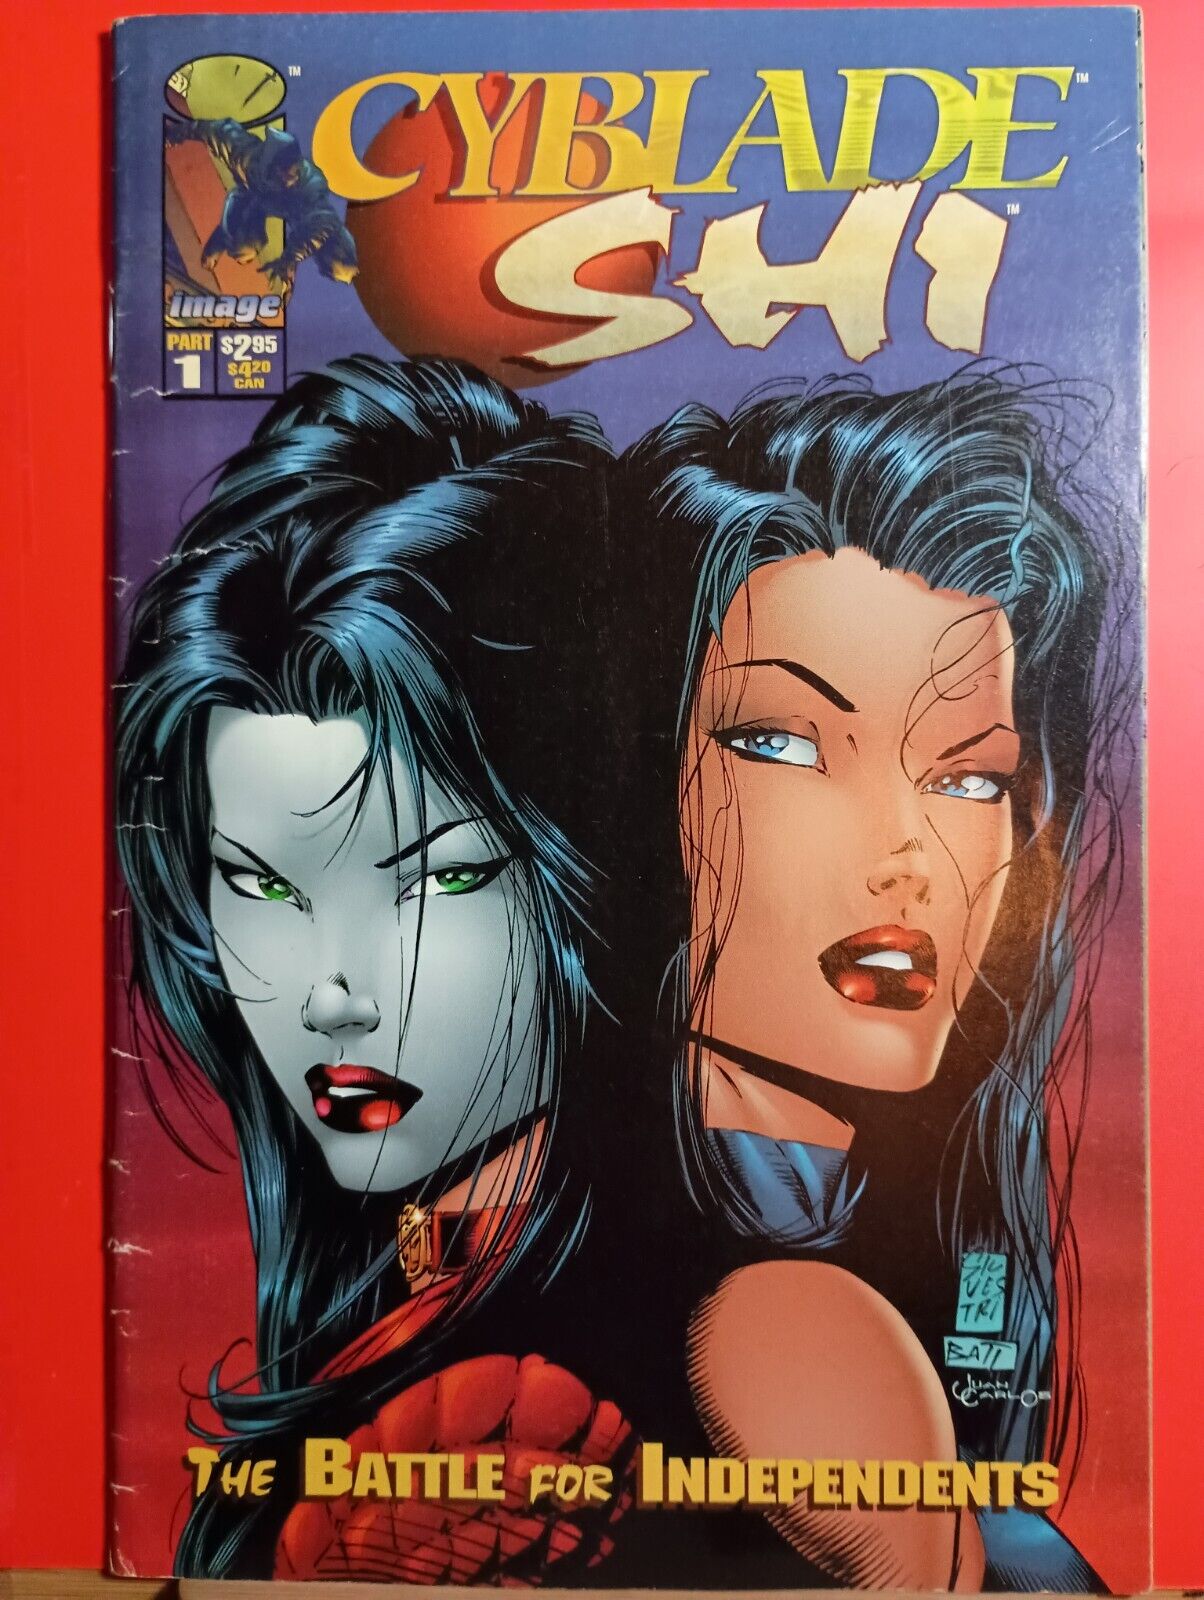 1995 Image Comics Cyblade Shi Battle Independents 1 Marc Silvestri Cover A Varia